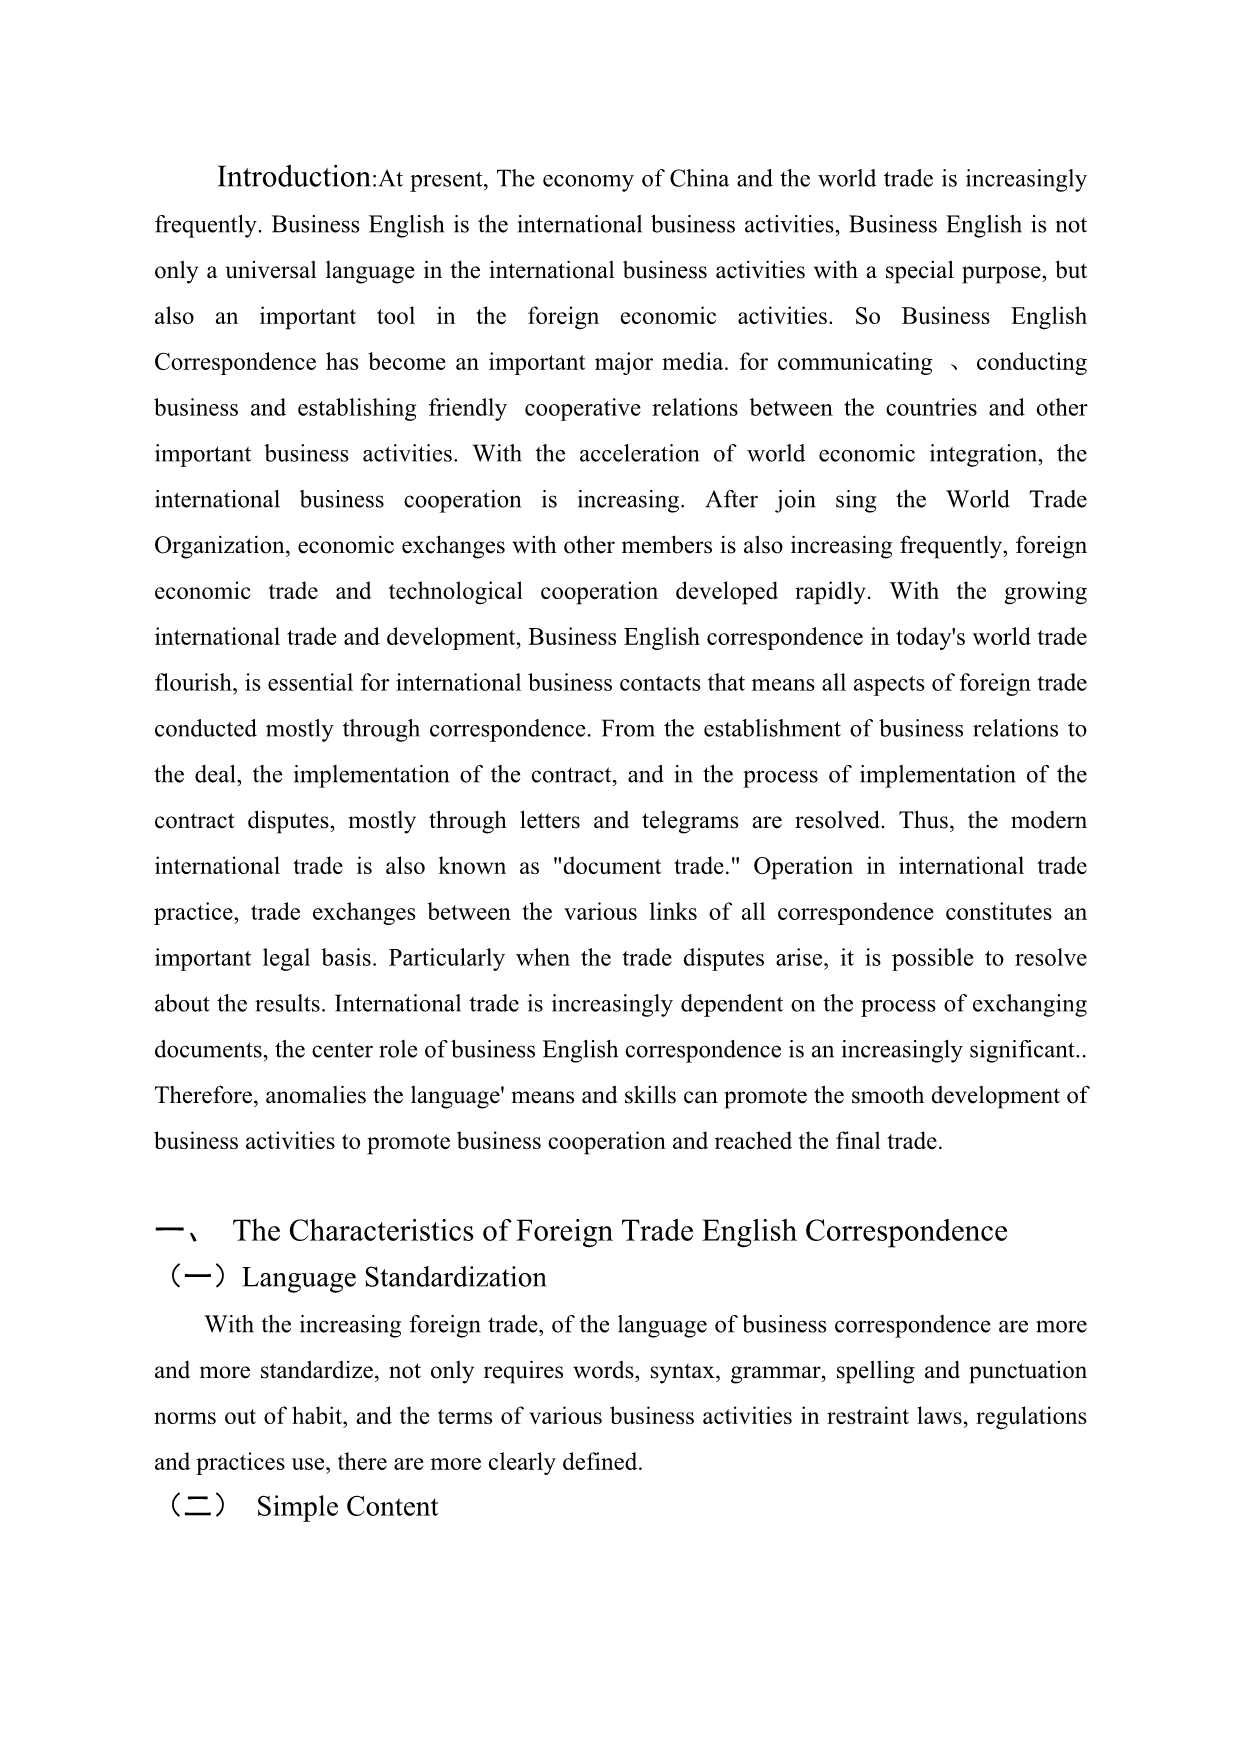 Business English Correspondence in the Role of Foreign Trade 英语专业毕业论文.doc_第3页